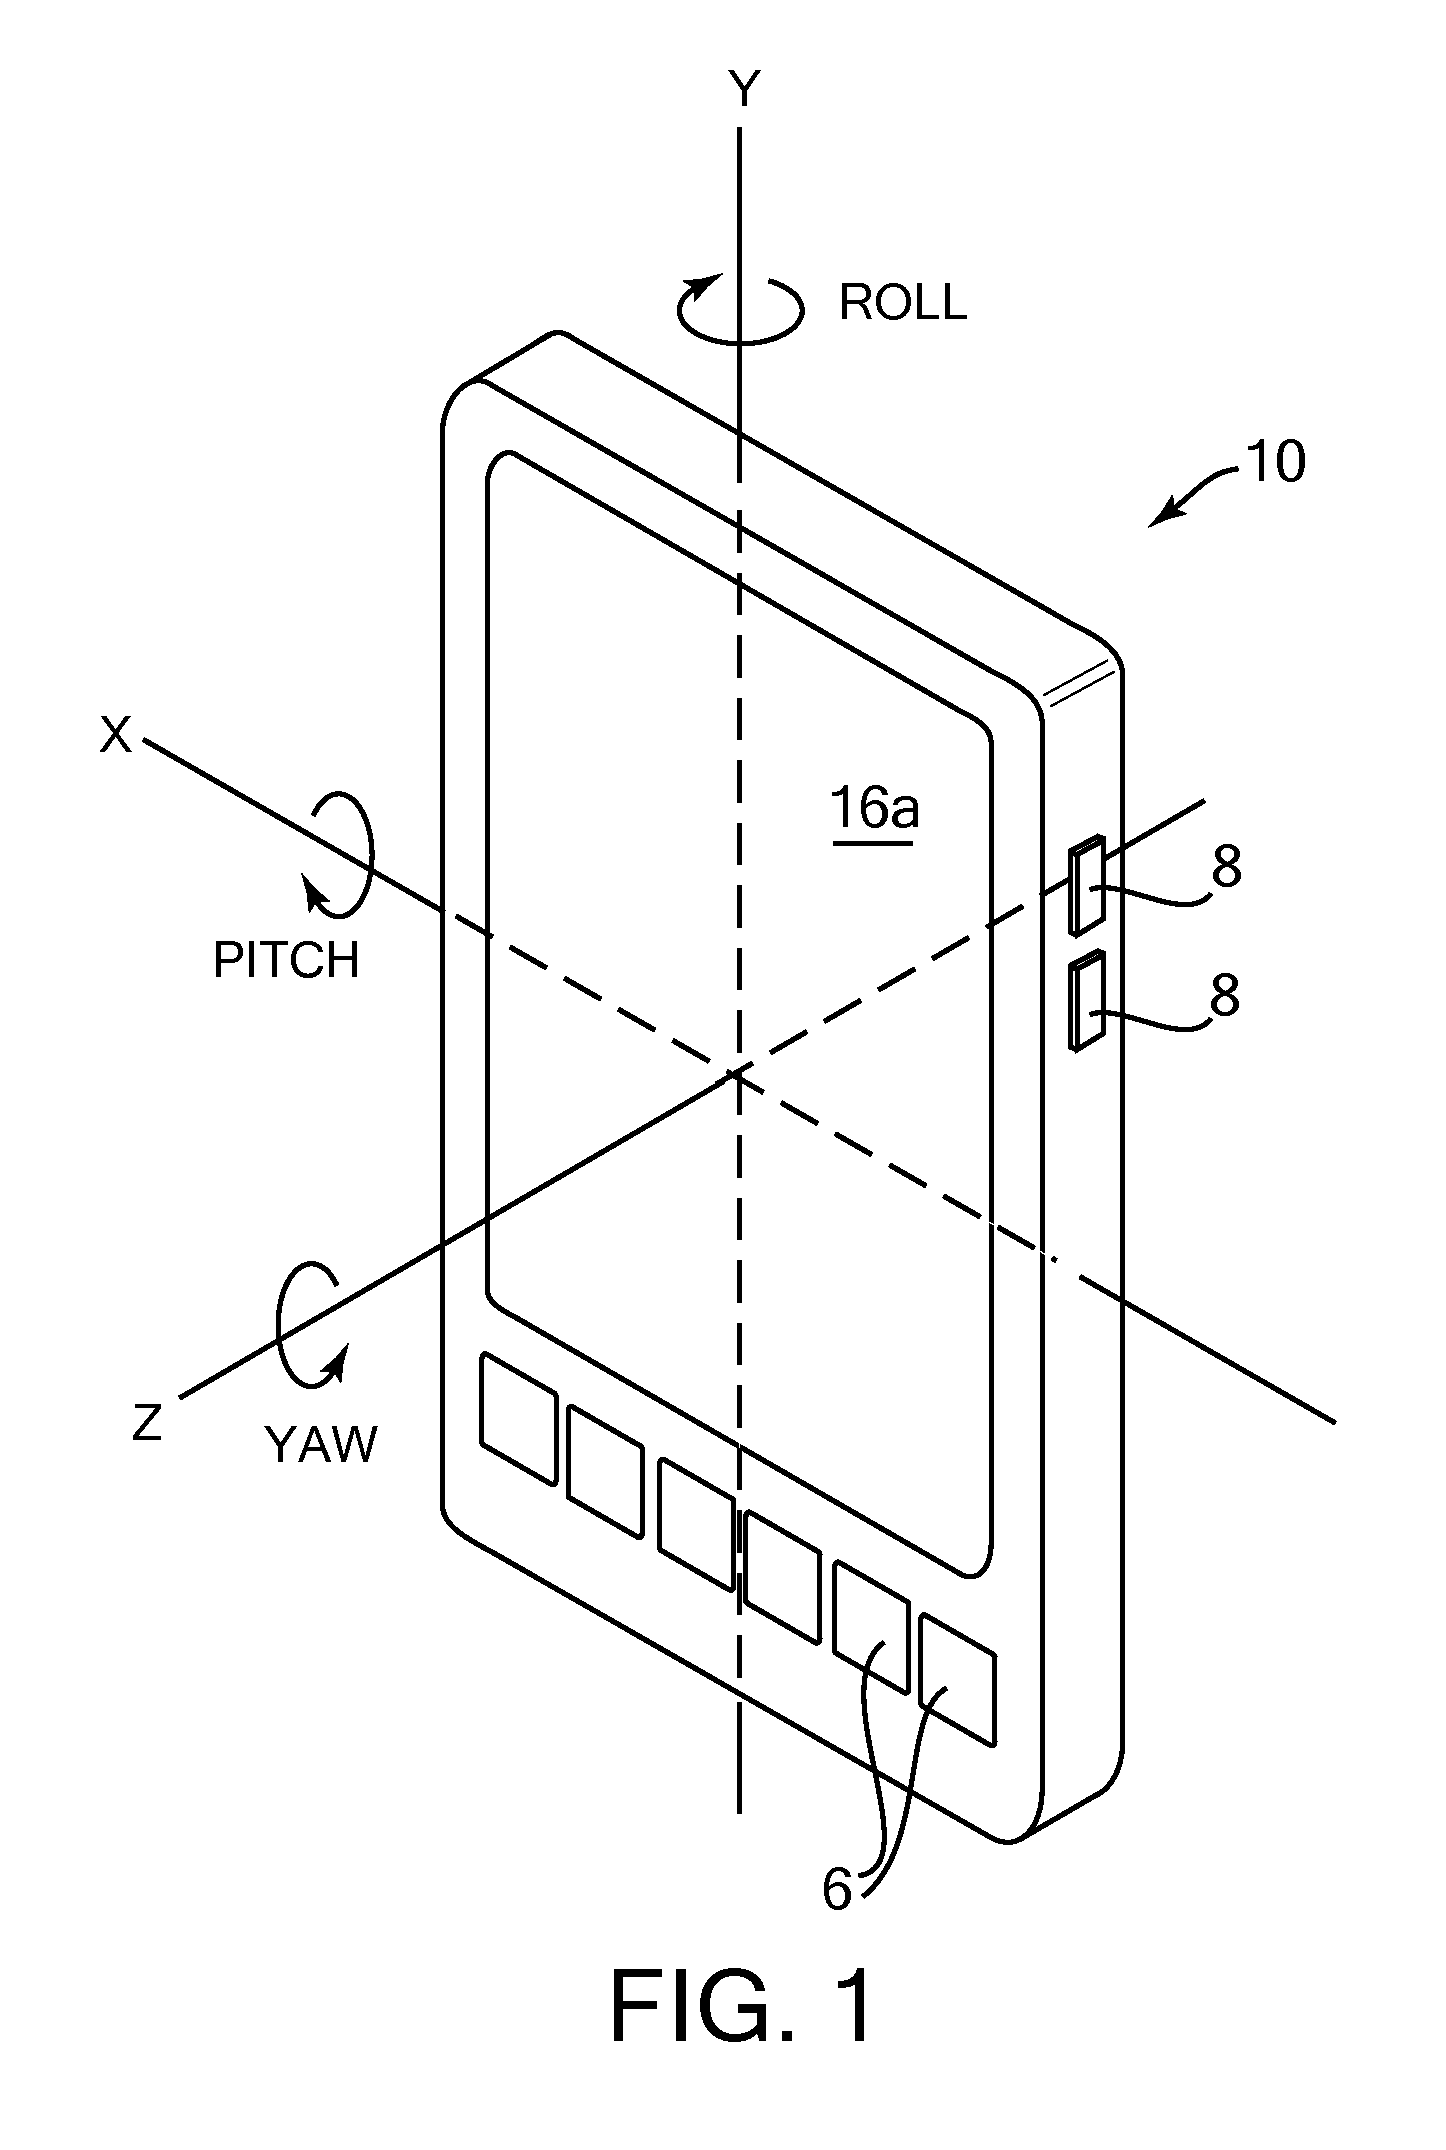 Mobile device user interface combining input from motion sensors and other controls